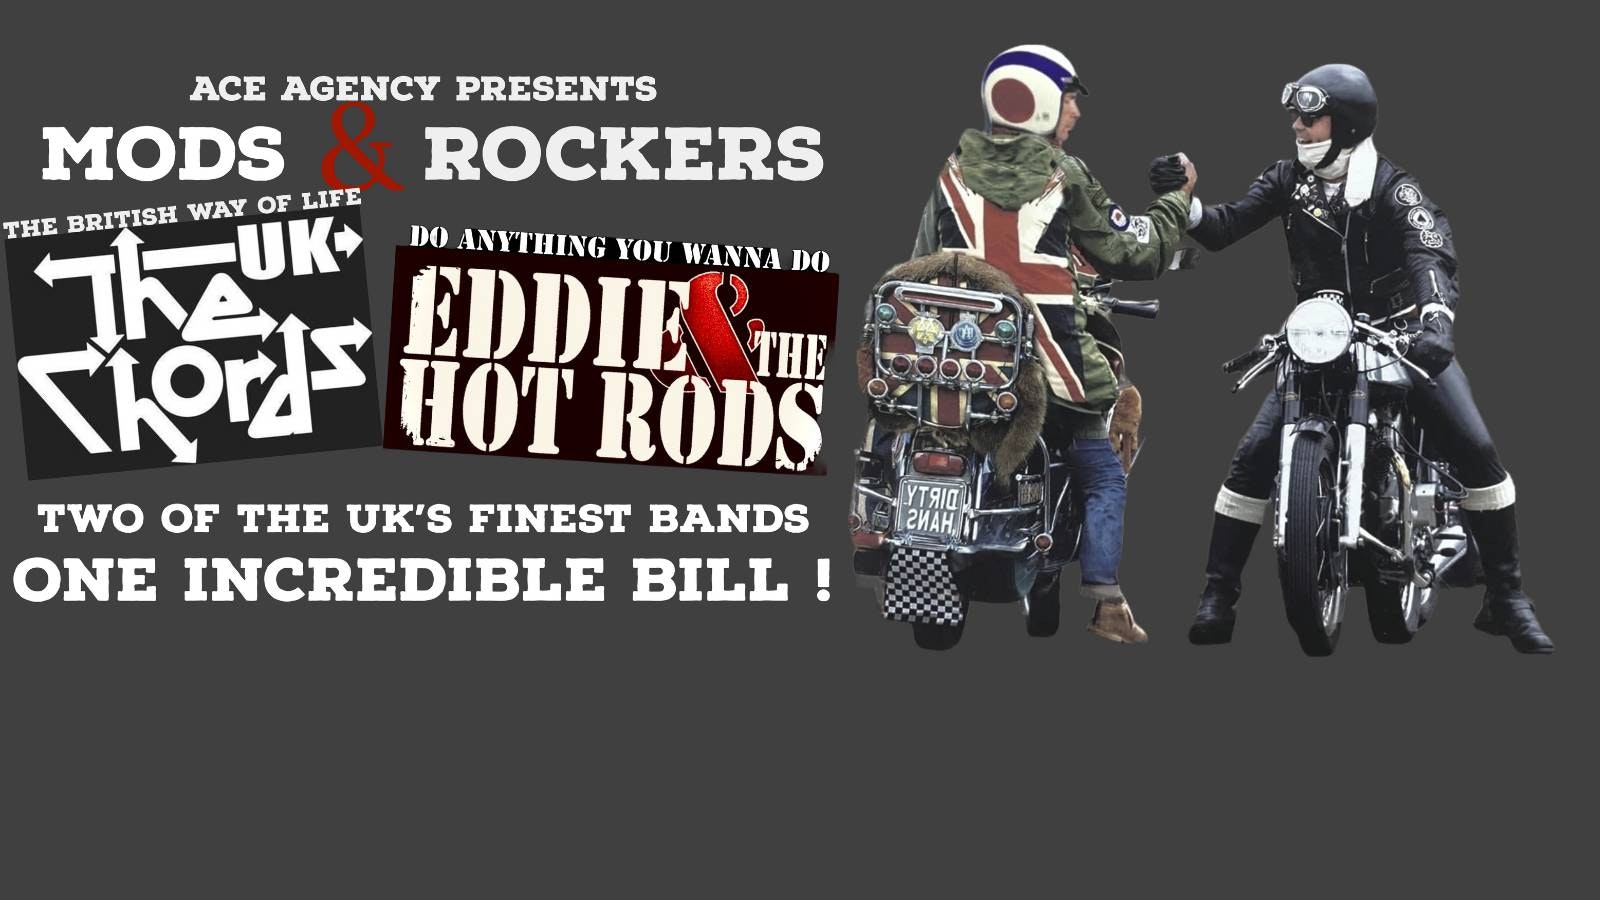 Eddie & The Hot Rods + The Chords UK